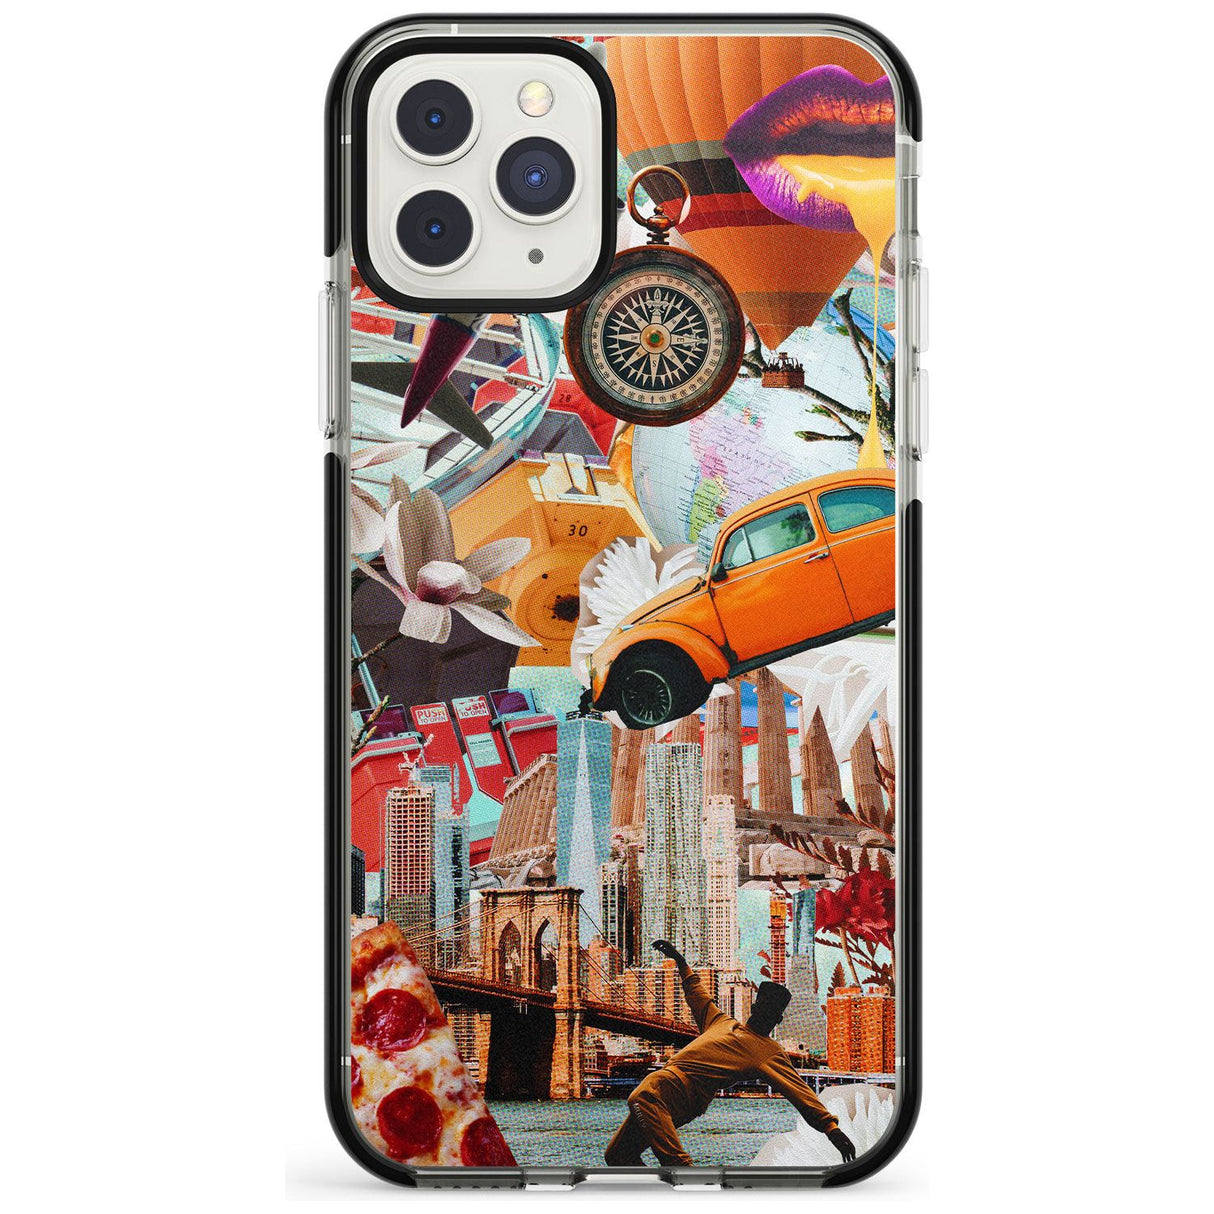 Vintage Collage: New York Mix Black Impact Phone Case for iPhone 11 Pro Max